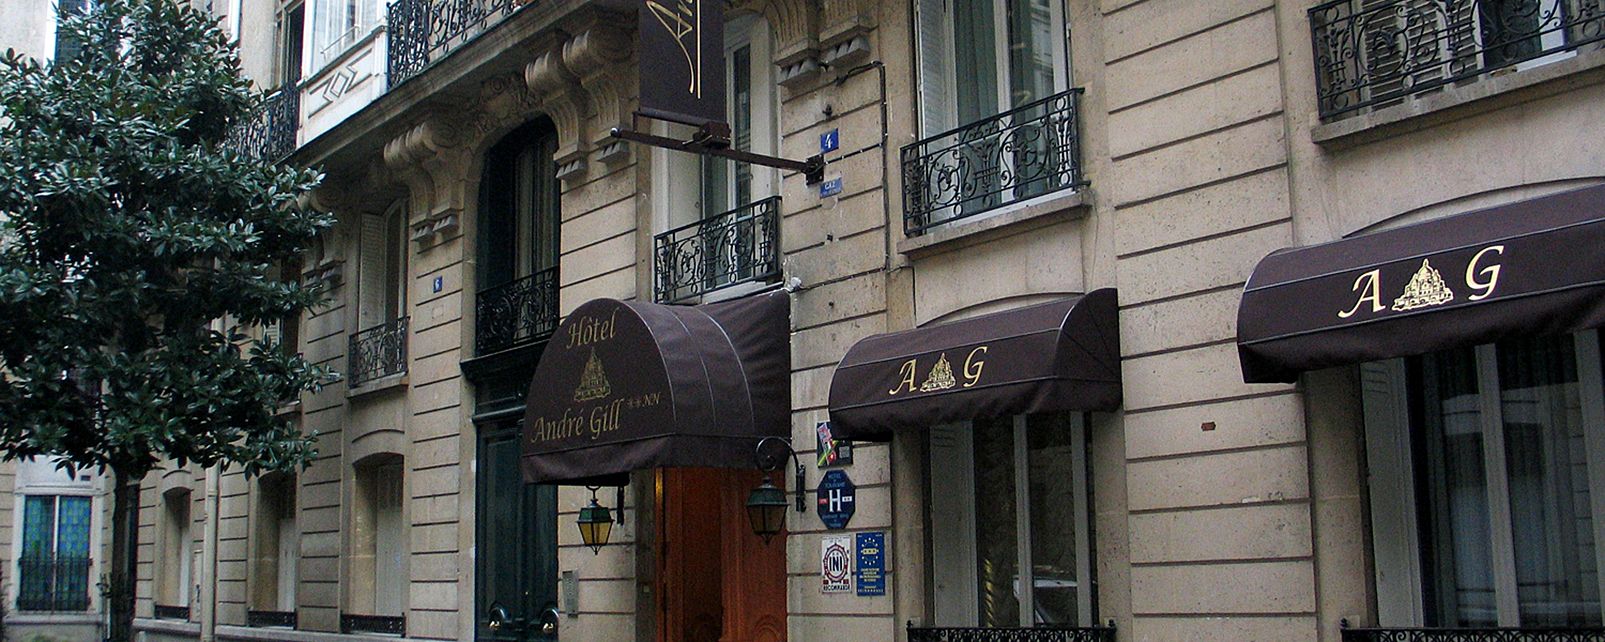 Hotel Andre Gill in Paris